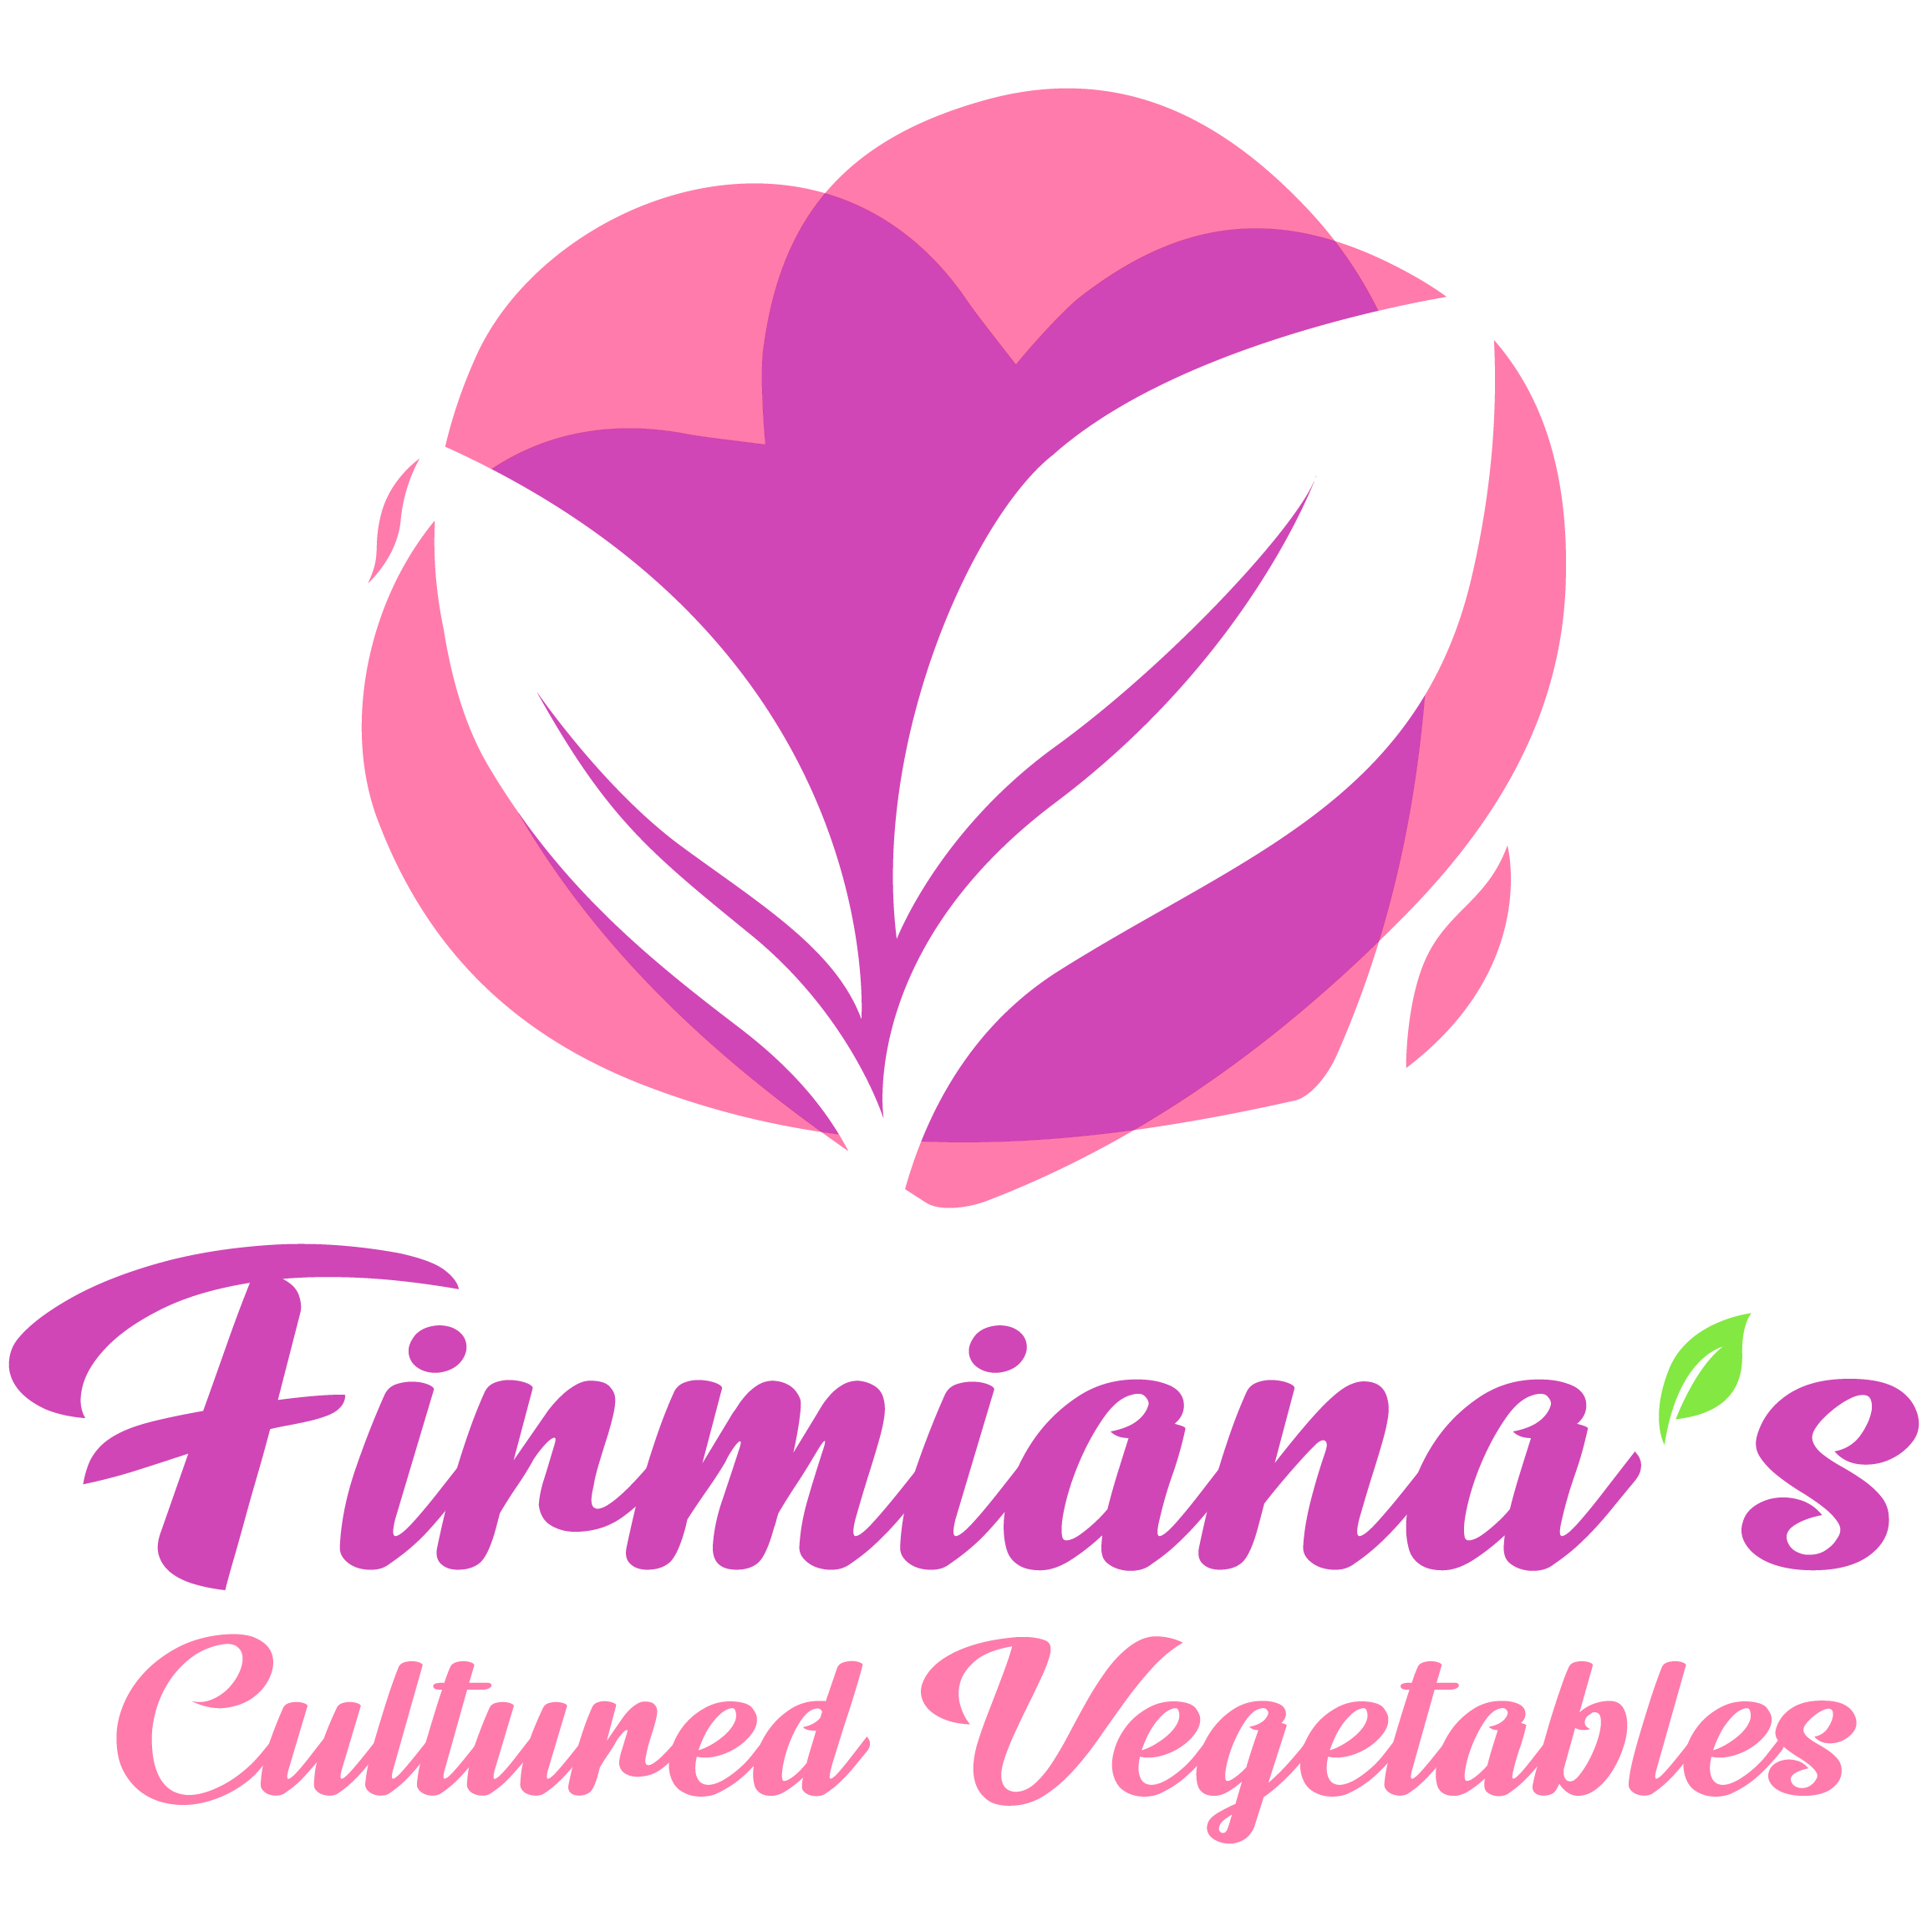 Firmiana's Cultured Vegetables